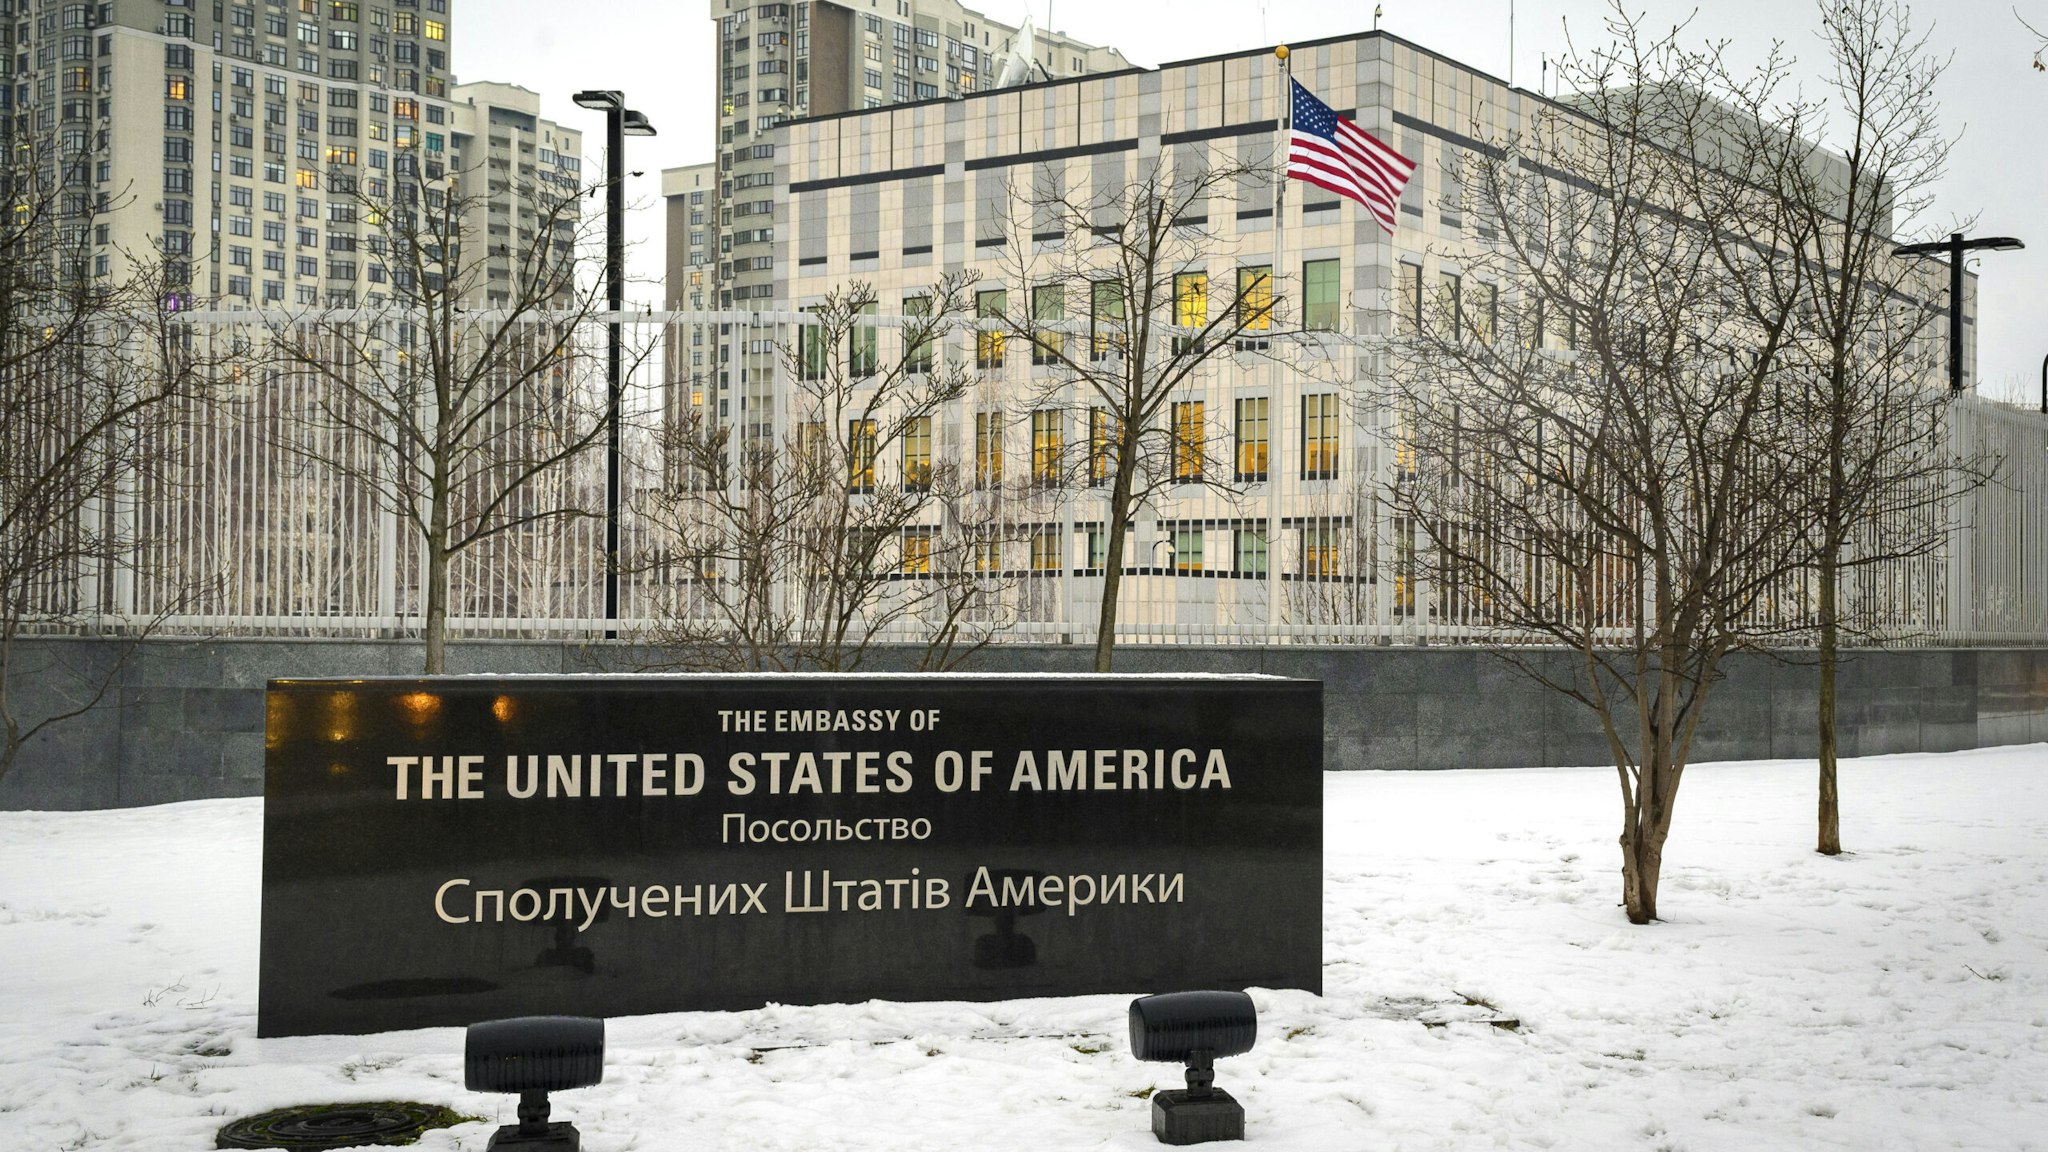 The U.S. embassy building in Kyiv, Ukraine, on Friday, Jan. 28, 2022. Russian Foreign Minister Sergei Lavrov said on Friday that the American proposal to defuse tensions with Ukraine contained rational elements, even though some key points were ignored.